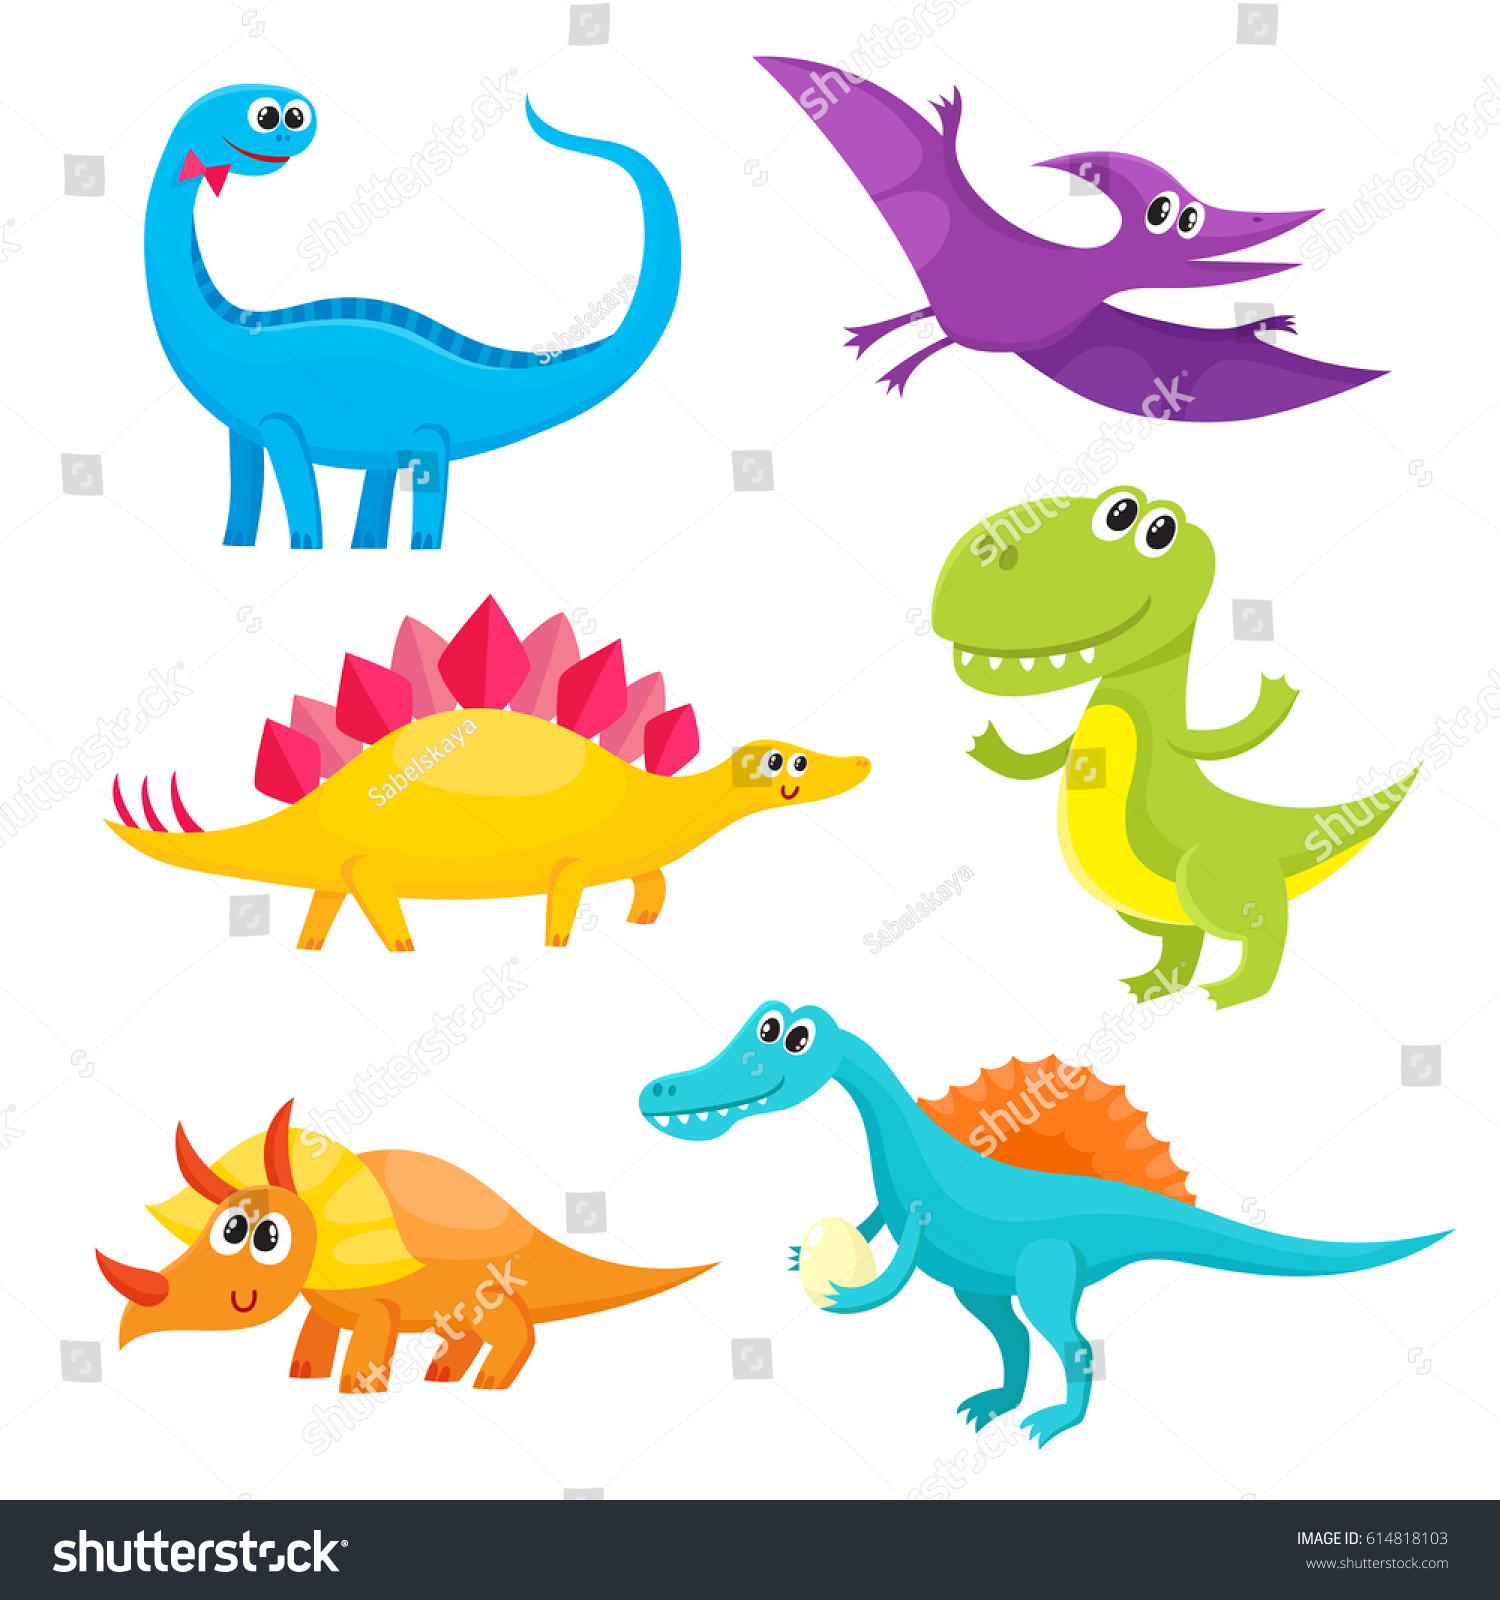 Set Cute Funny Smiling Baby Dinosaurs Stock Vector 614818103 - Shutterstock